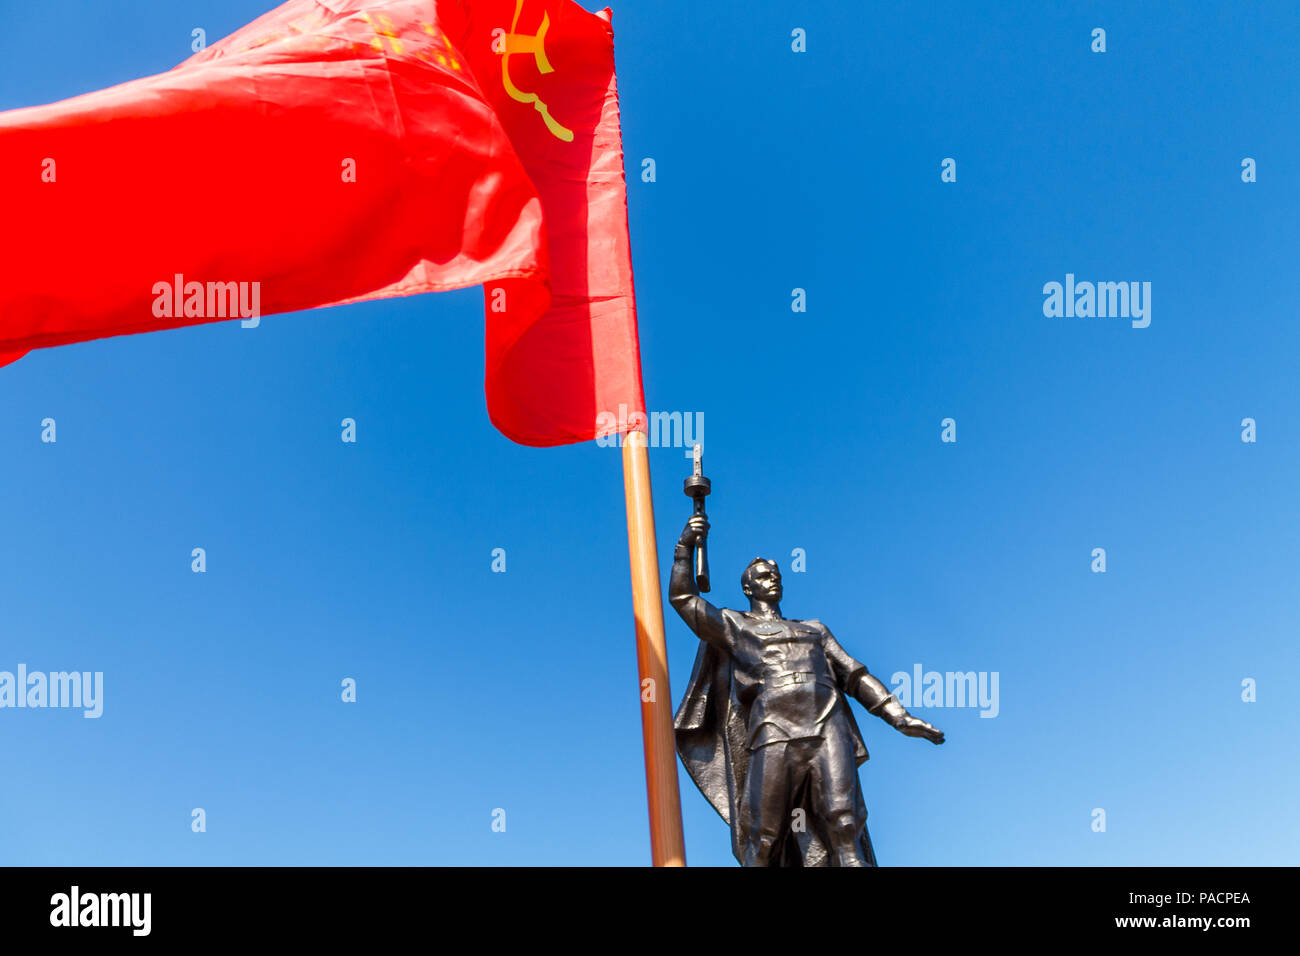 Monument to a Soviet soldier with a submachine gun in the hand of a participant in the Second World War with red flag USSR. Stock Photo